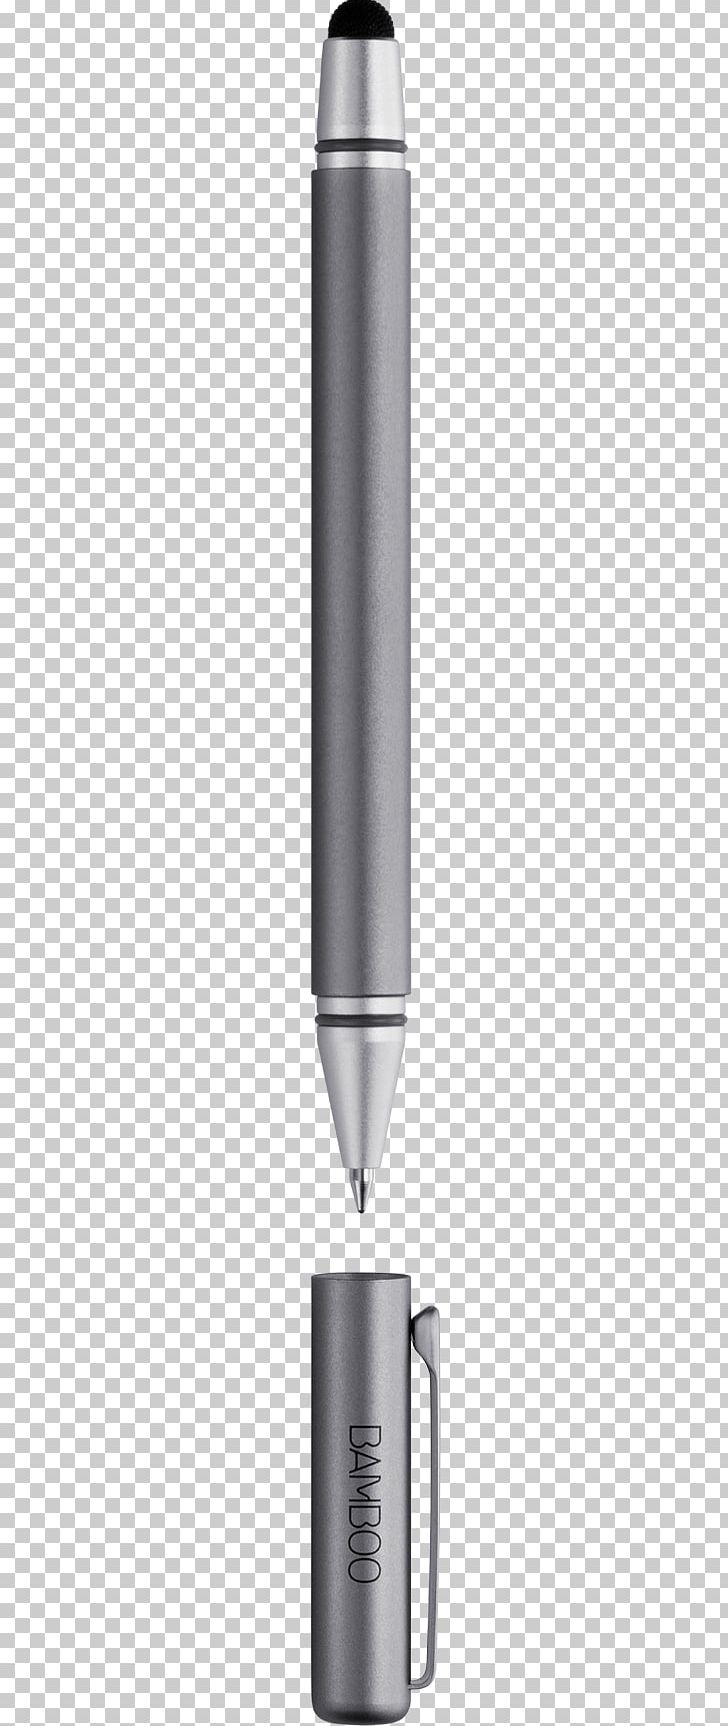 Paper Wacom Technology Wacom Bamboo Stylus Digital Pen Walmart Canada PNG, Clipart, Ballpoint Pen, Digital Pen, Everyday Low Price, Hardware, Ink Bamboo Material Free PNG Download